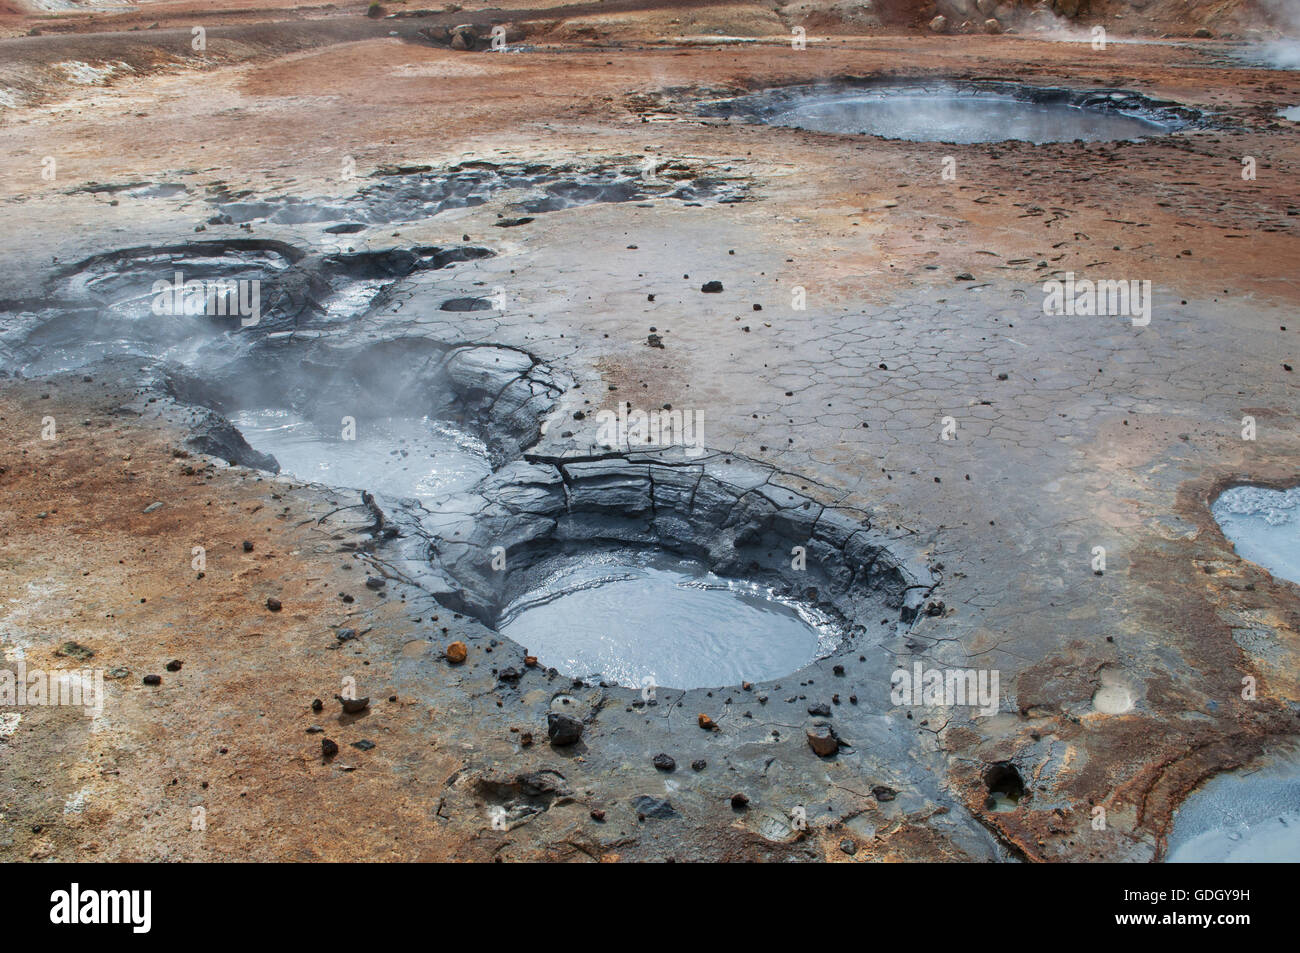 Iceland: Hverir, a geothermal area in the Myvatn region famous for its fumaroles, hot springs and sulfur Stock Photo